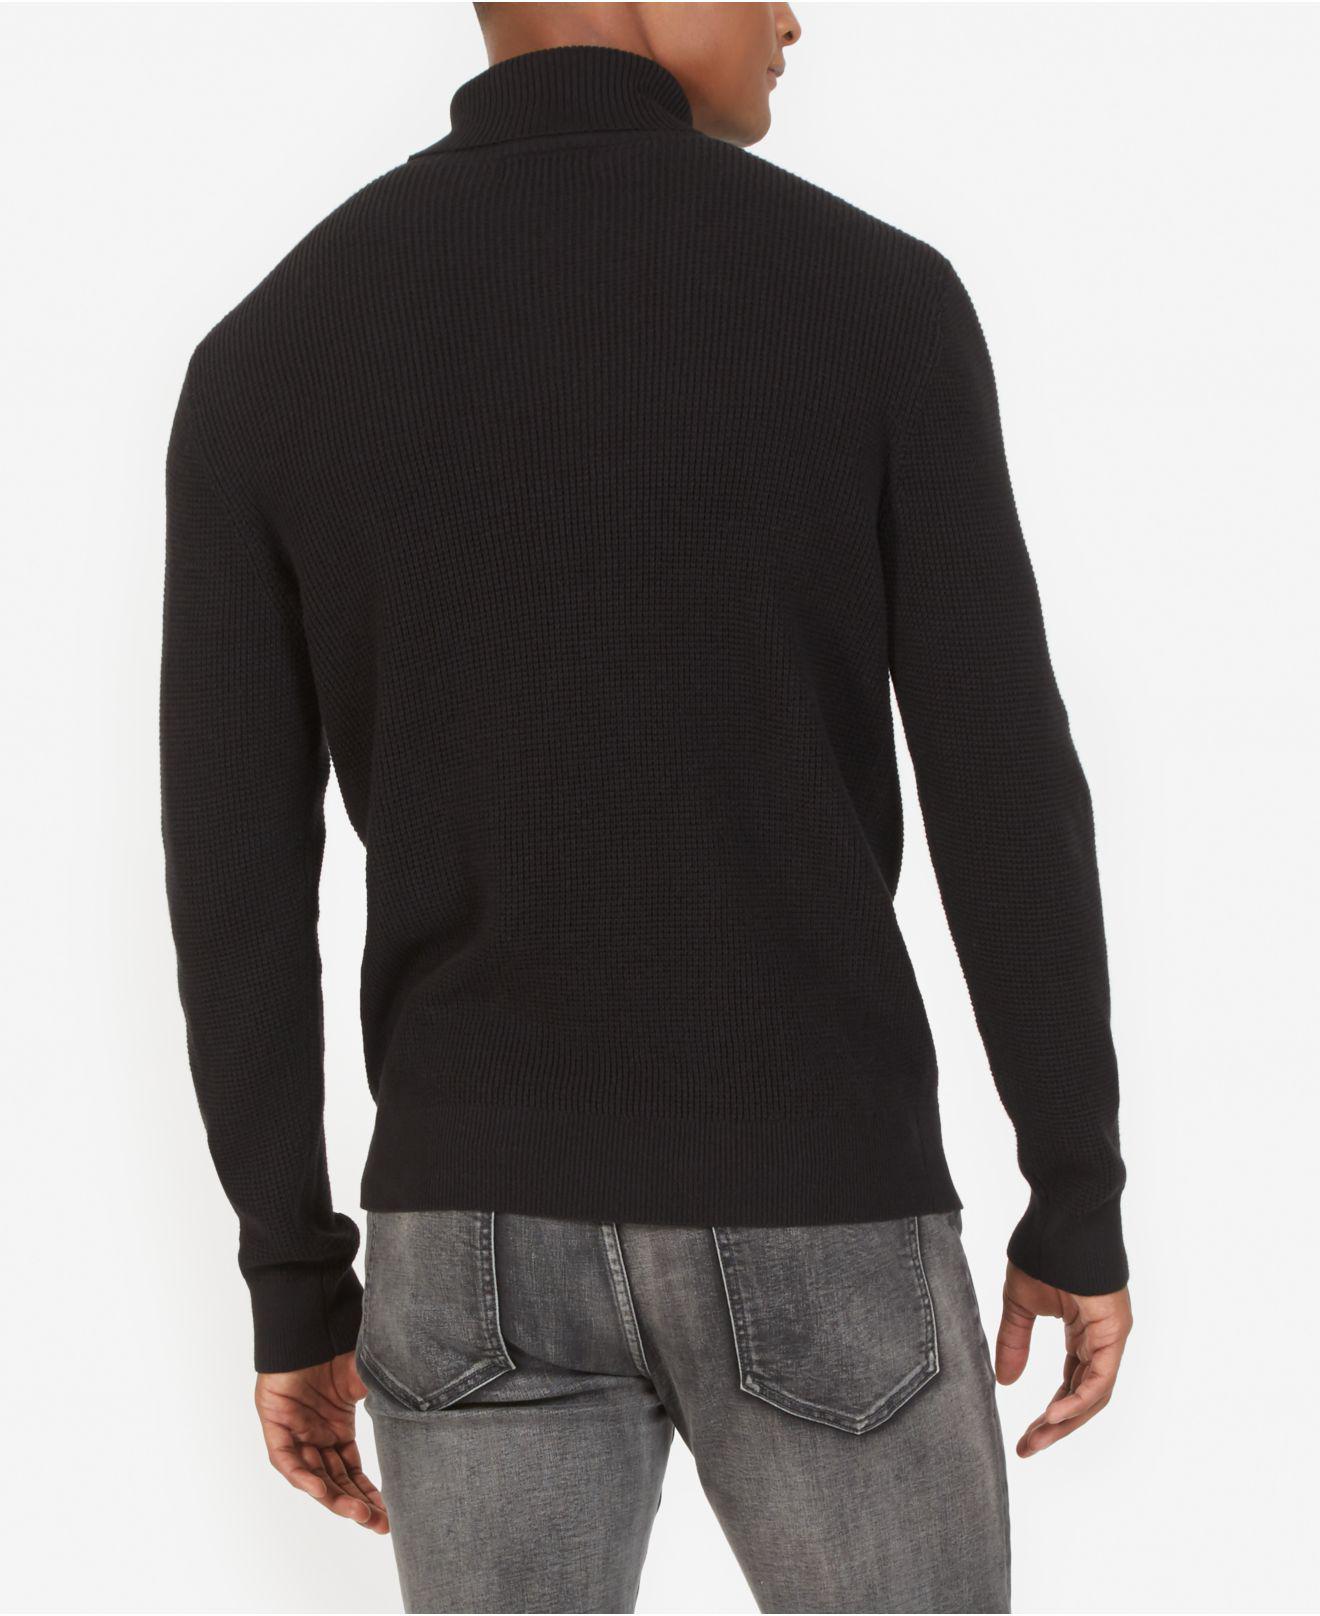 Kenneth Cole Cotton Investment Turtleneck Sweater in Black for Men - Lyst